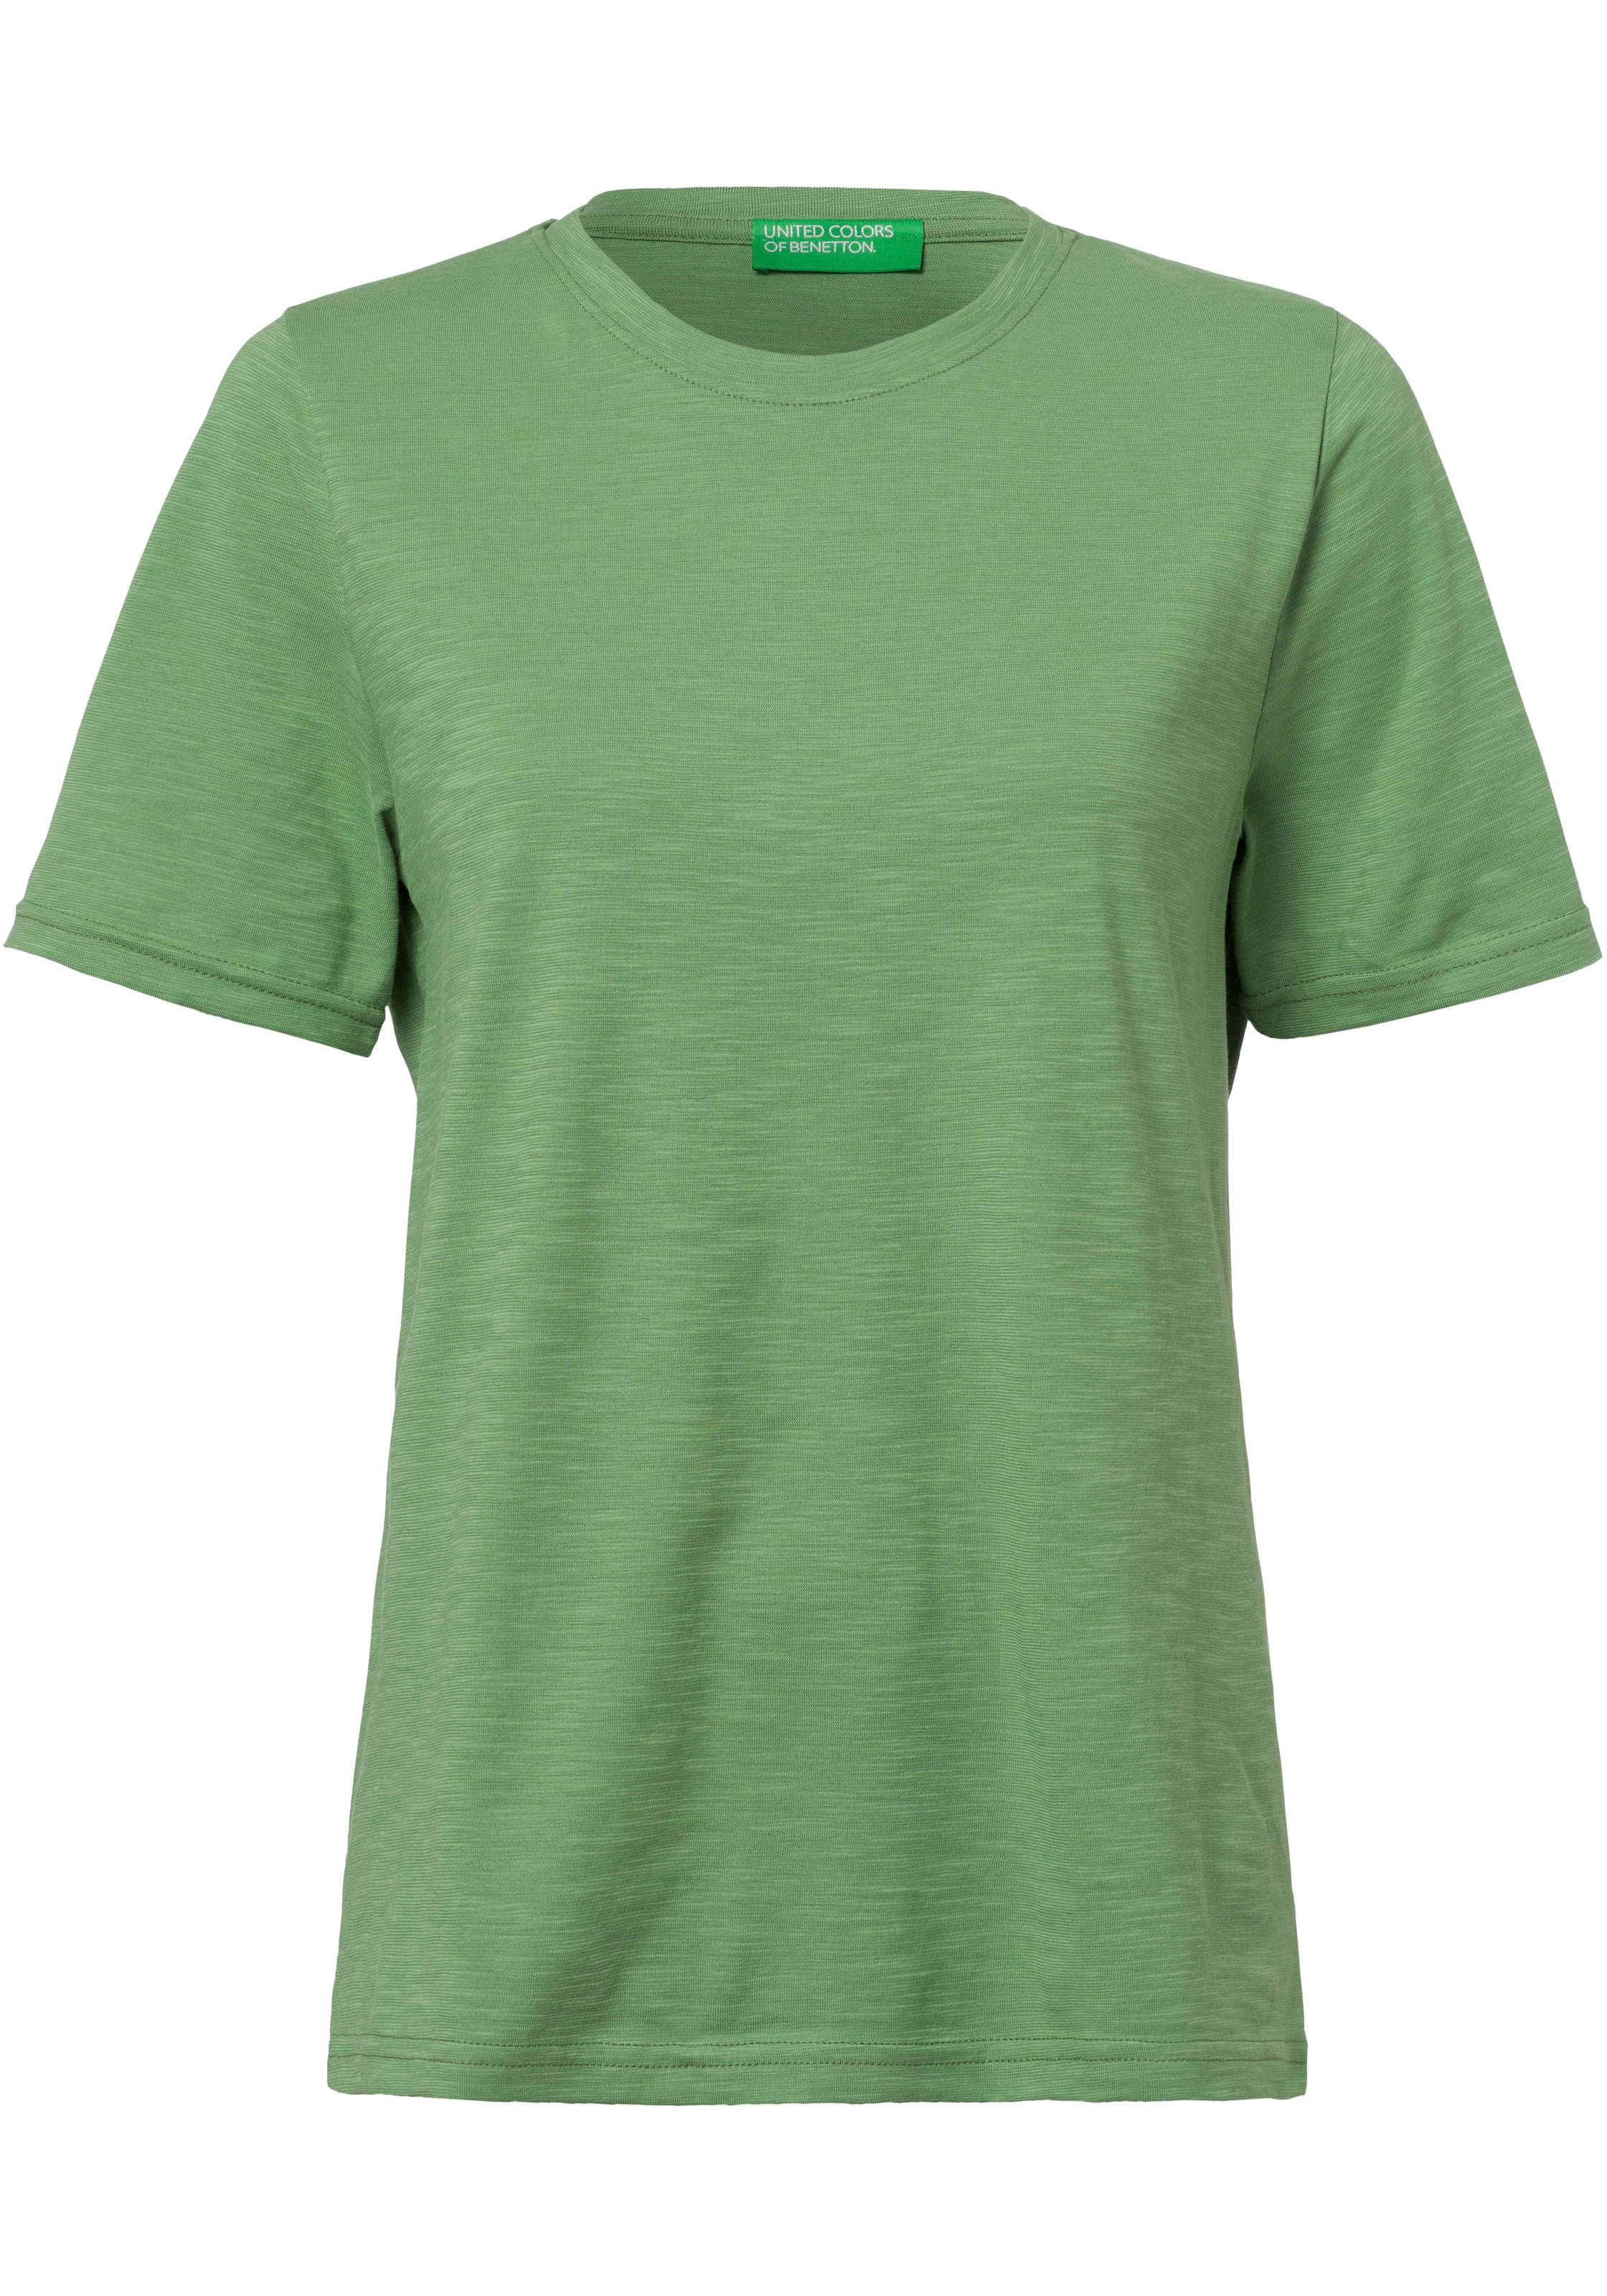 United Colors of Benetton T-Shirt, ♕ in cleaner bei Basic-Optik